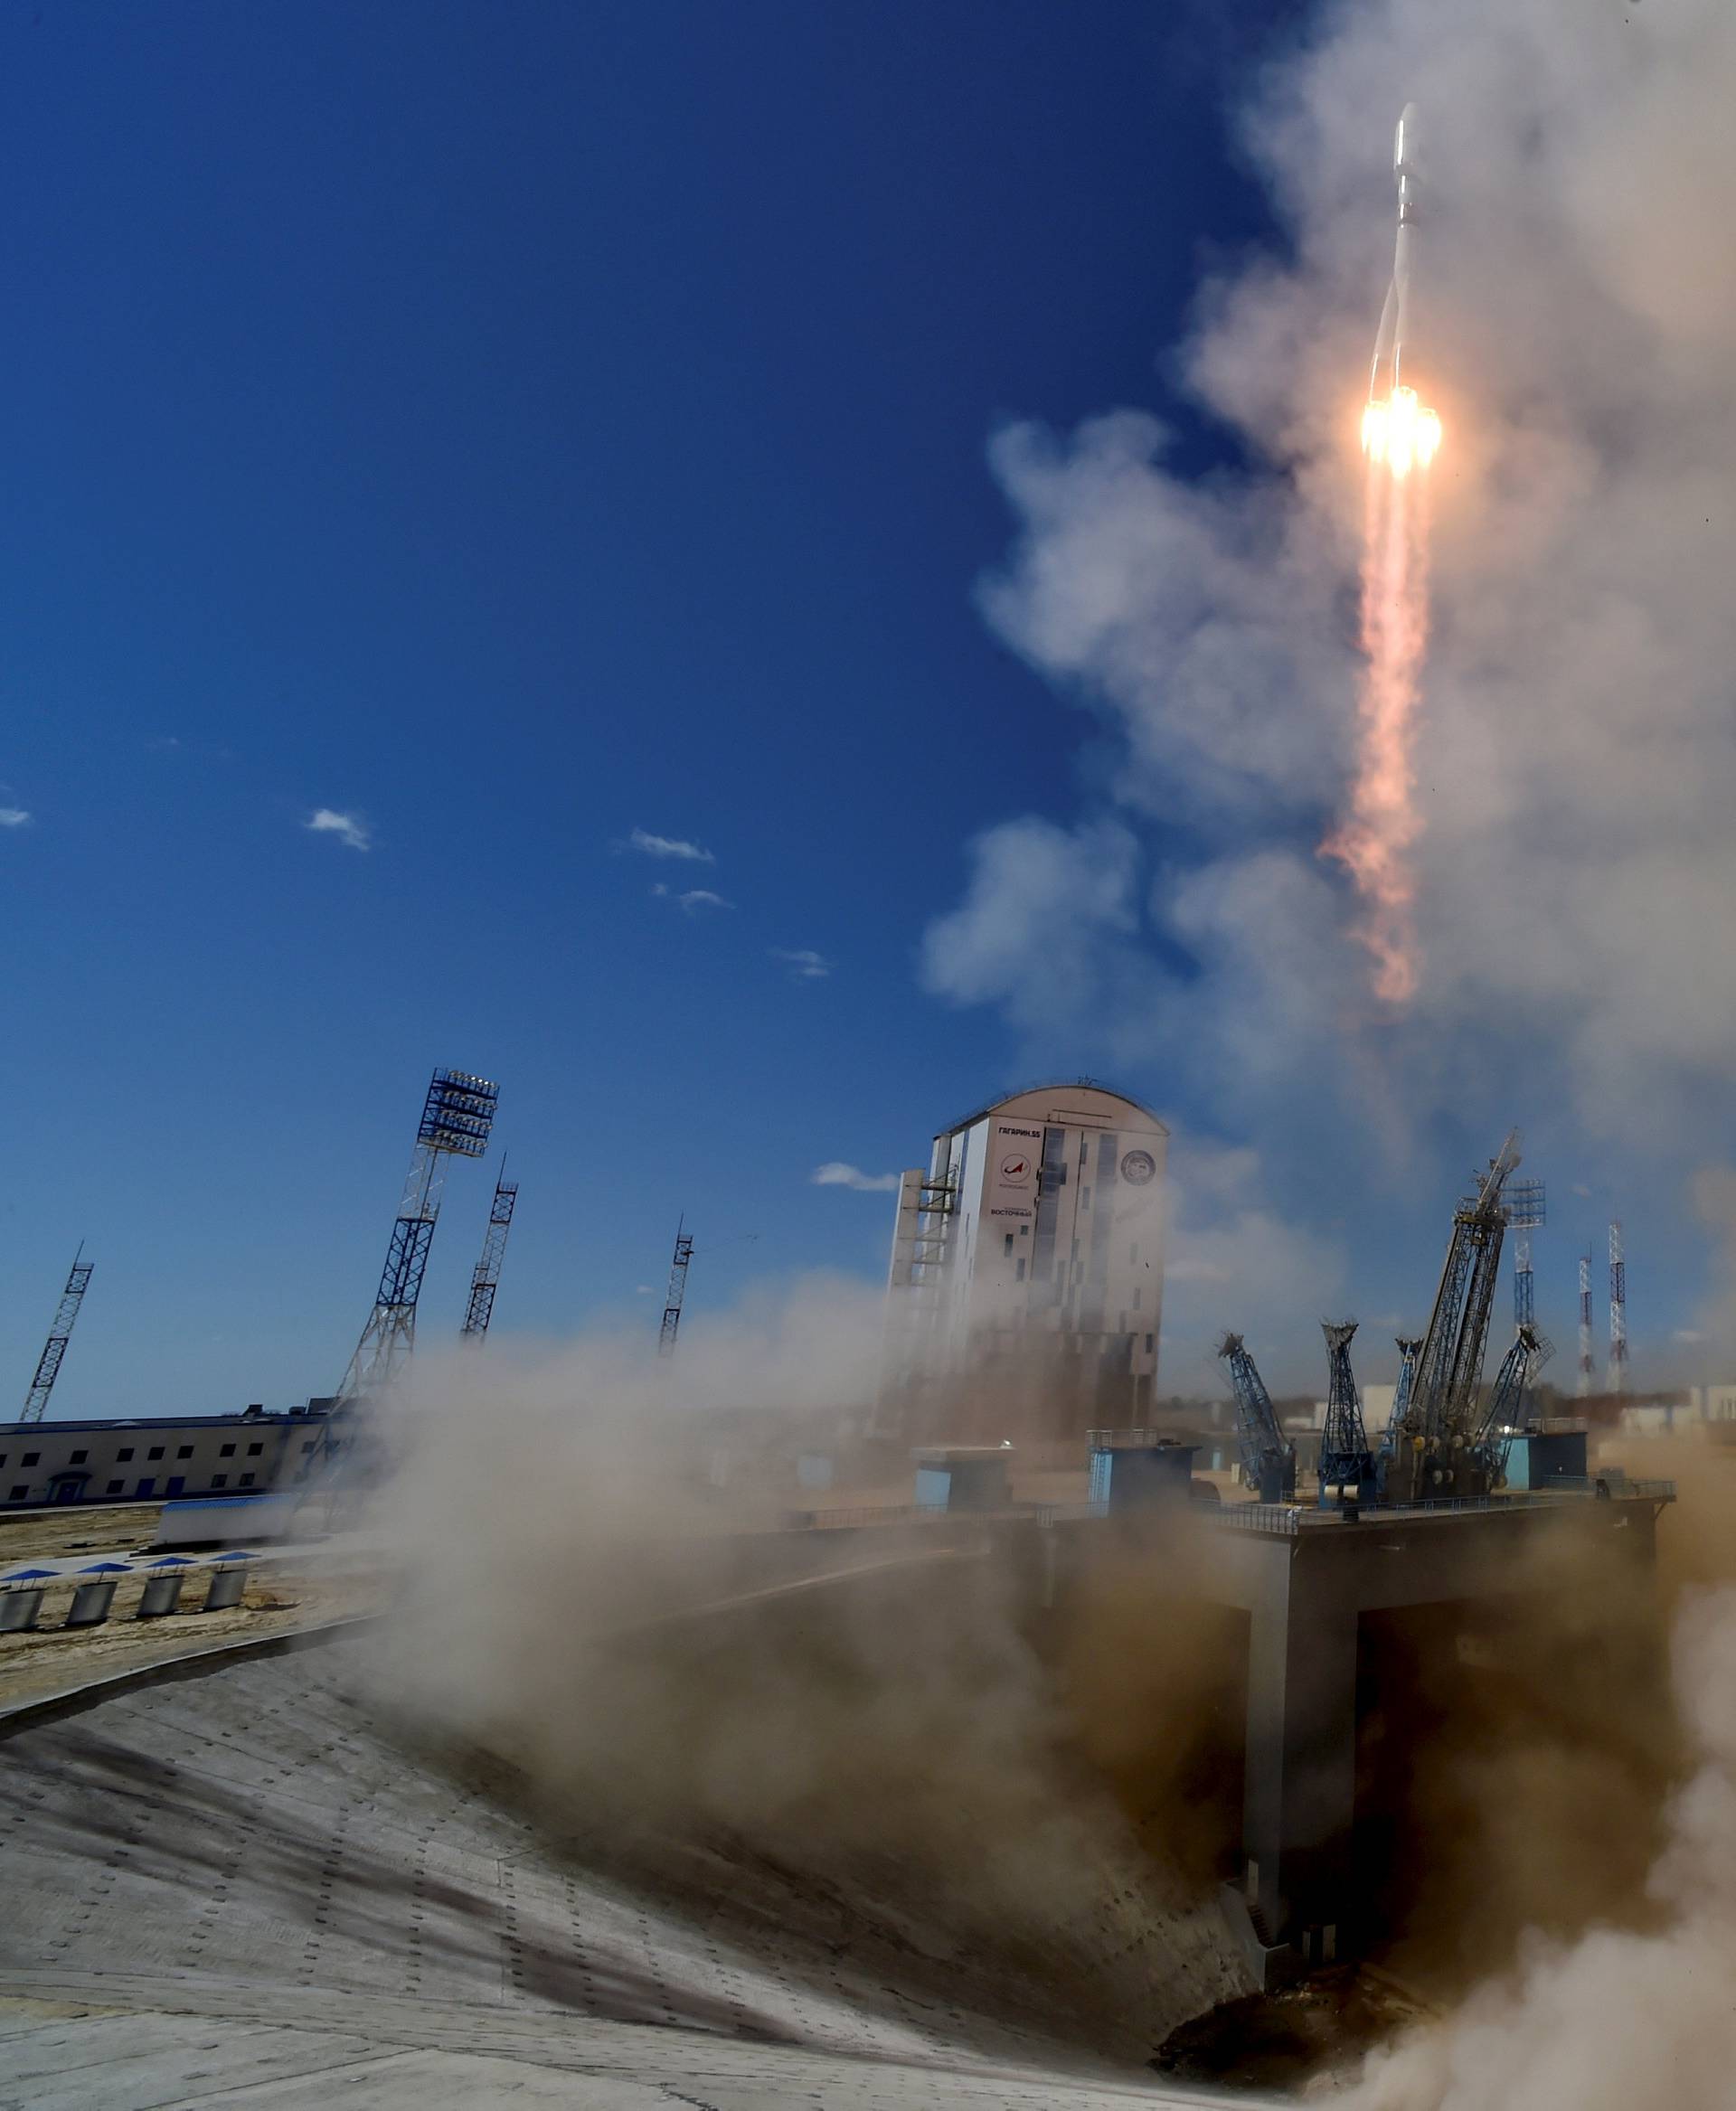 A Russian Soyuz 2.1A rocket carrying Lomonosov, Aist-2D and SamSat-218 satellites lifts off from the launch pad at the new Vostochny cosmodrome outside the city of Uglegorsk, about 200 kms from the city of Blagoveshchensk